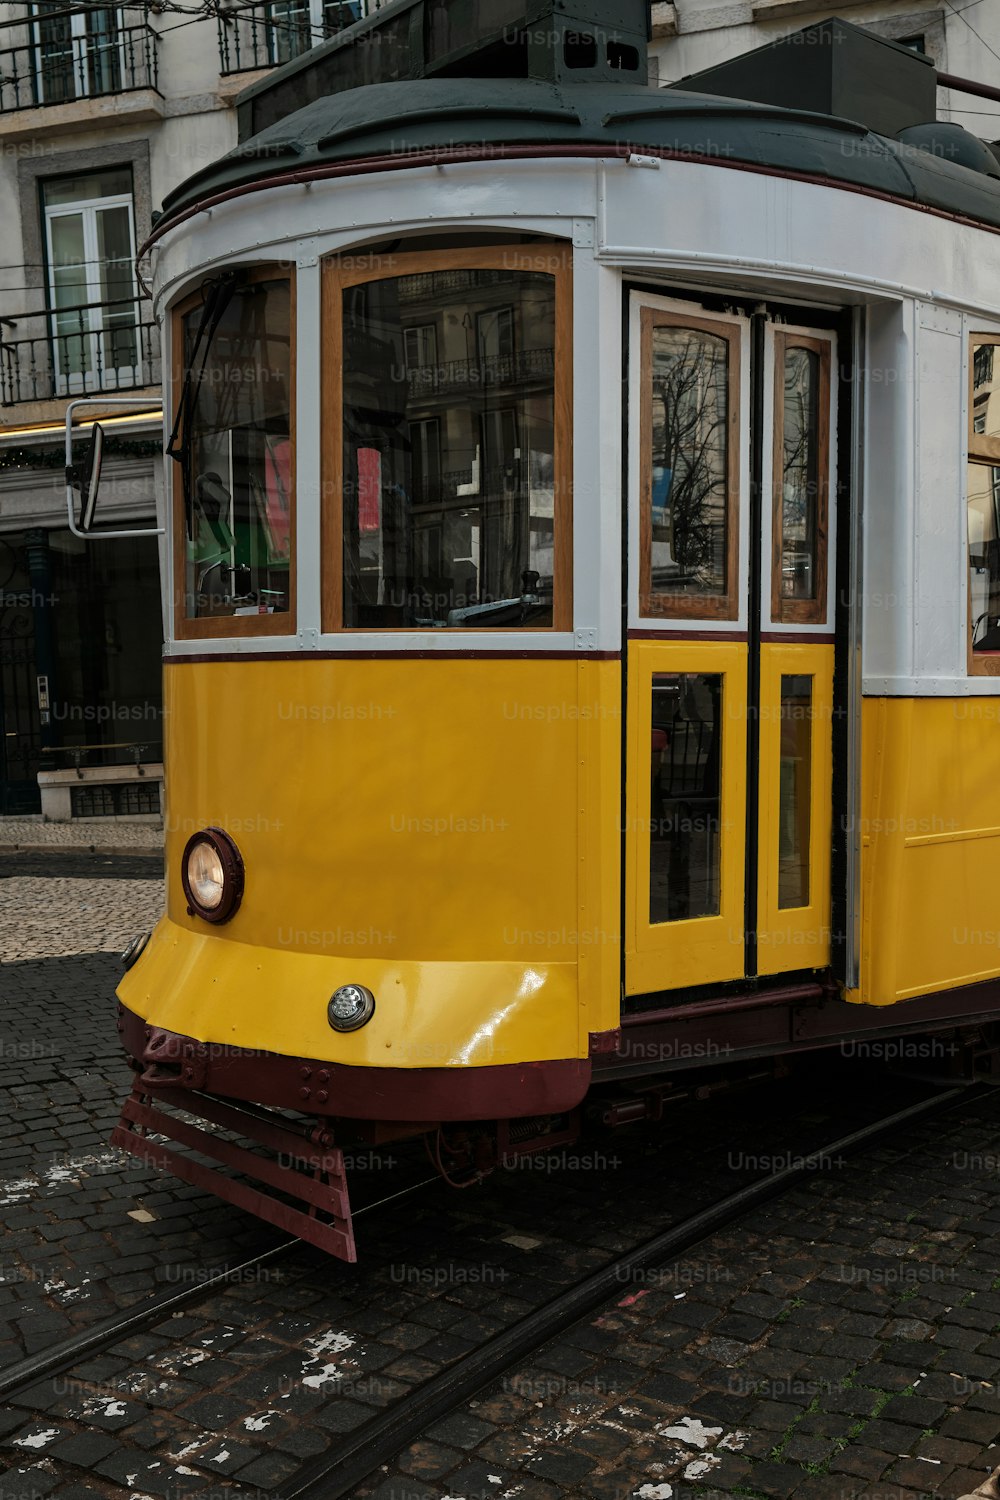 113,927 Tramway Images, Stock Photos, 3D objects, & Vectors